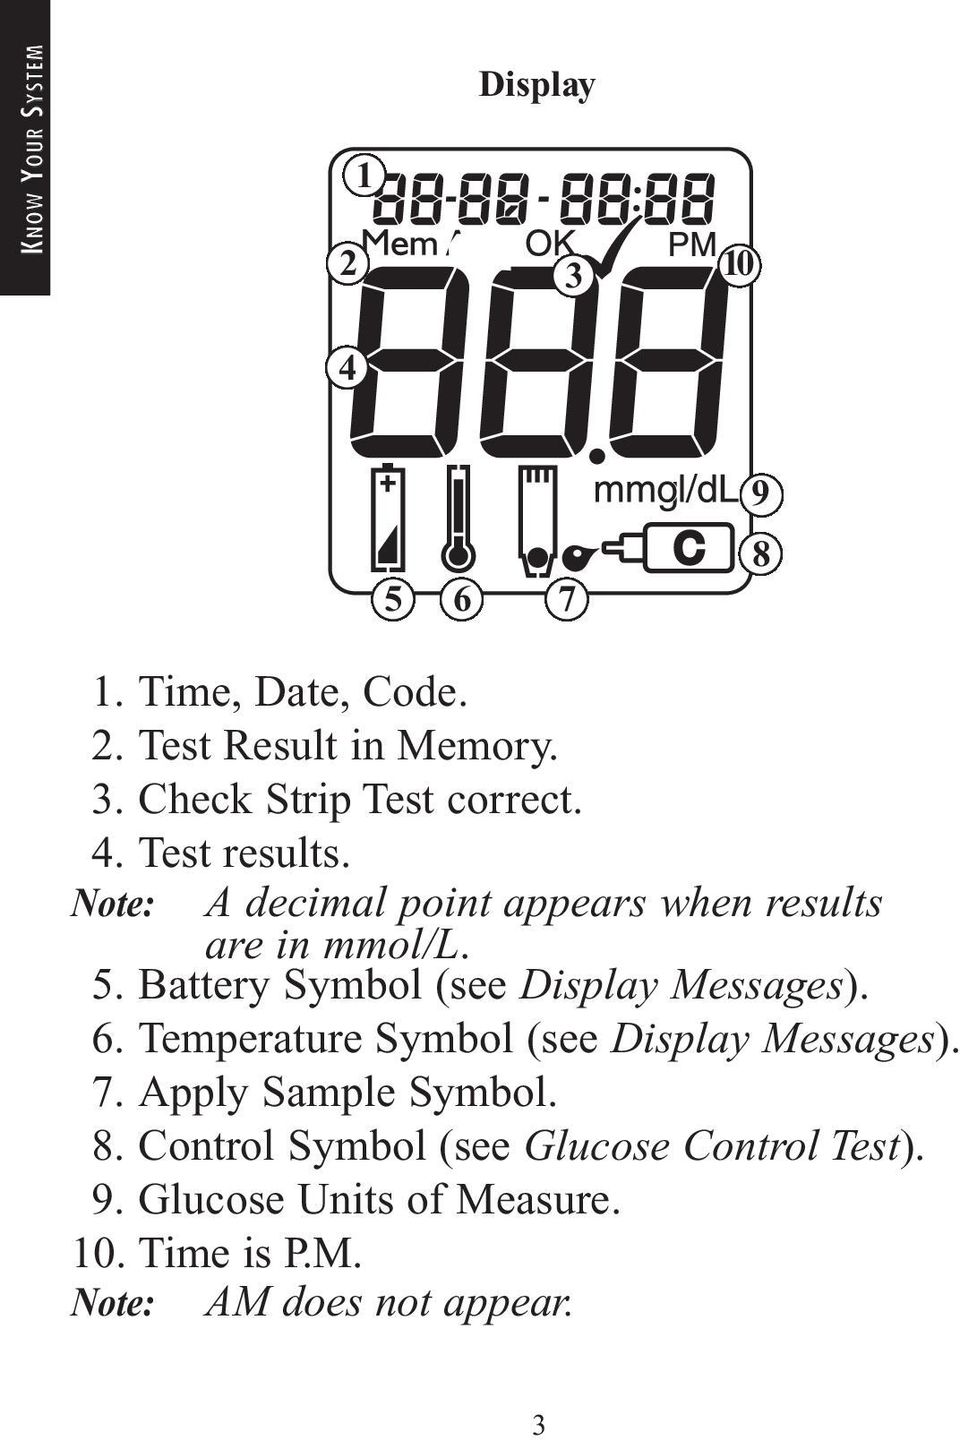 Battery Symbol (see Display Messages). 6. Temperature Symbol (see Display Messages). 7.